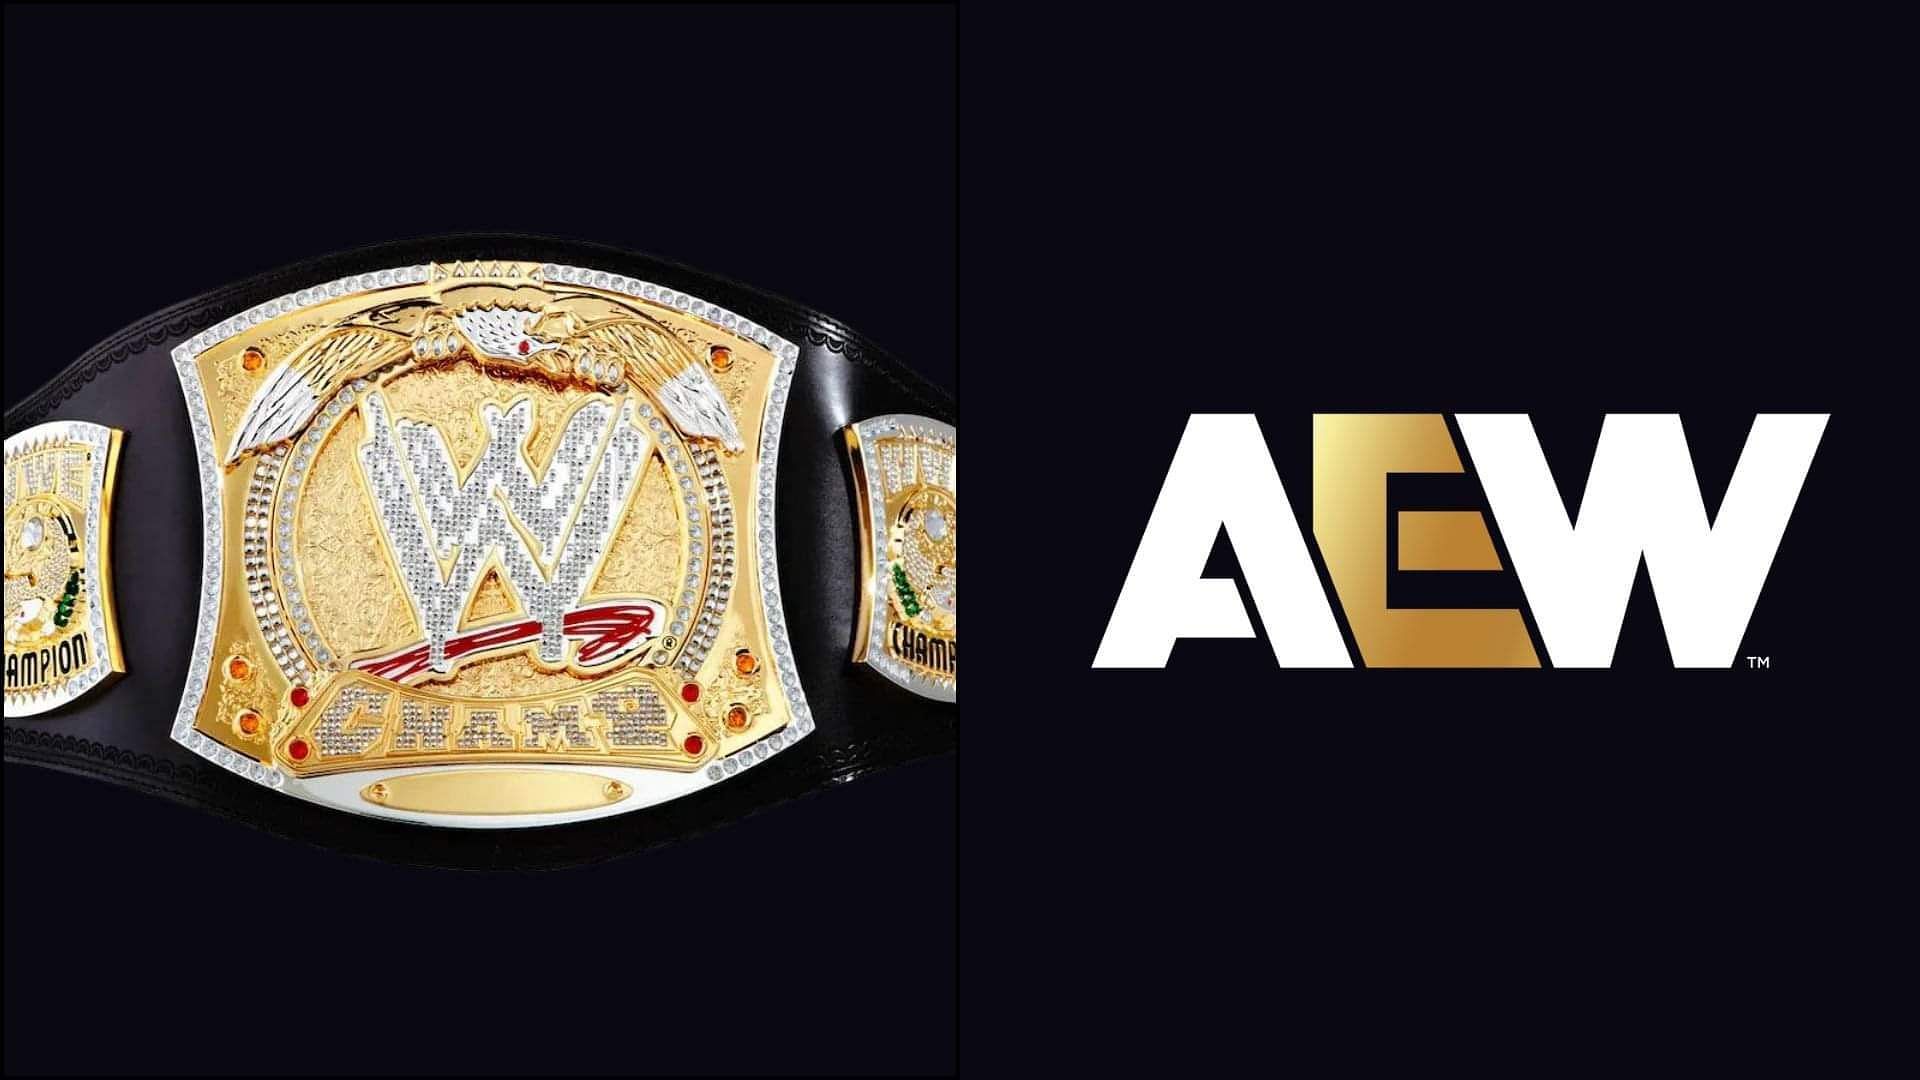 AEW is a Jacksonville-based wrestling promotion led by Tony Khan (Image source: WWE Shop and AEW